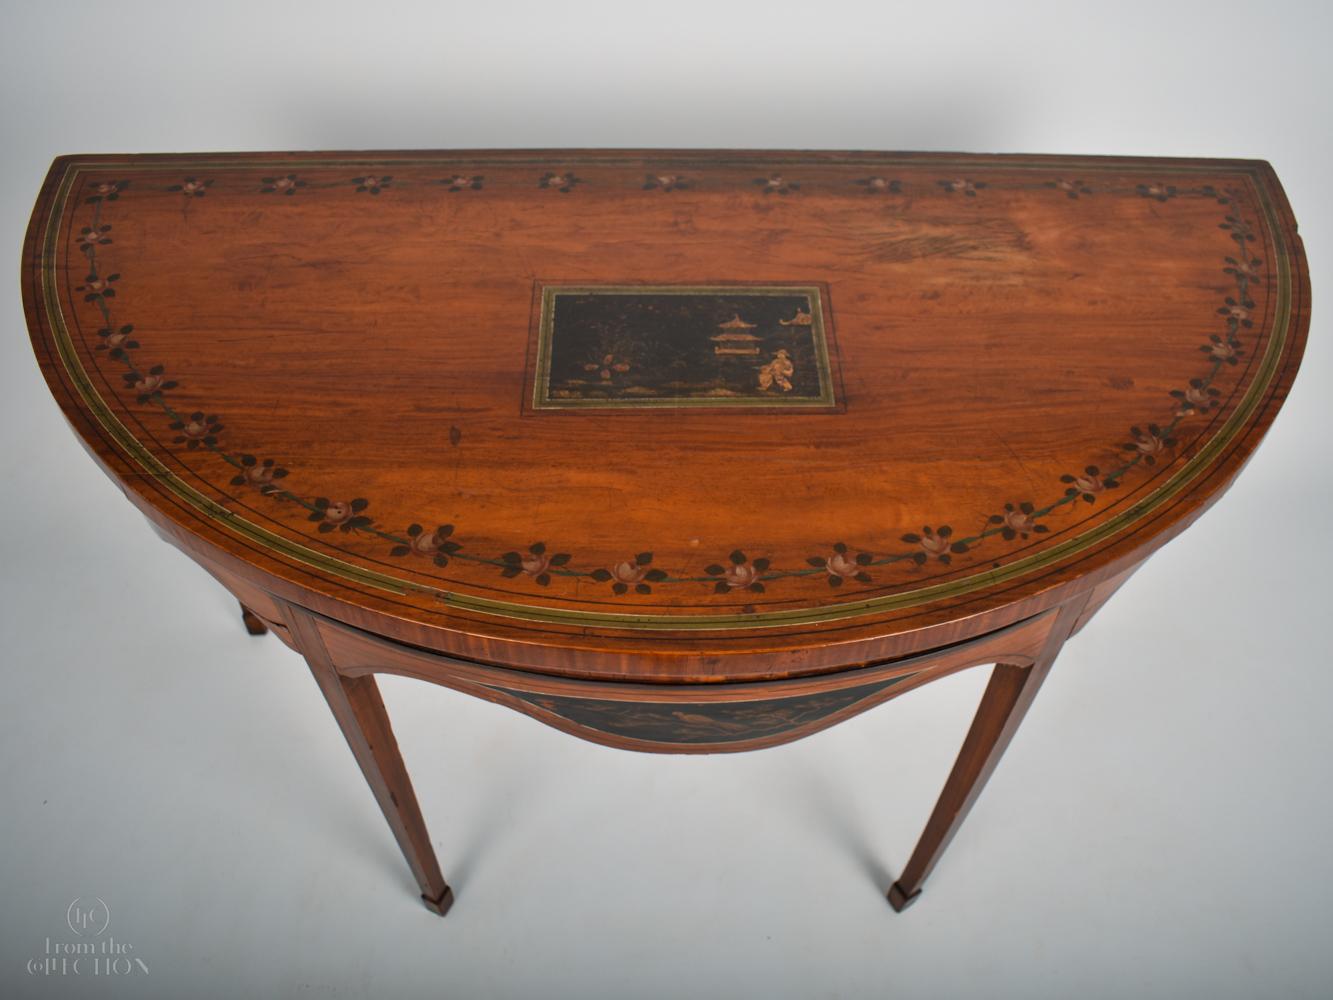 Chinese style demi-lune Pier or Console table; a rich satinwood with a dark Chinese image cartoon inlaid to the centre of the top surrounded by a garland of flowers around the border, with painted panels to the top and the front skirting and four